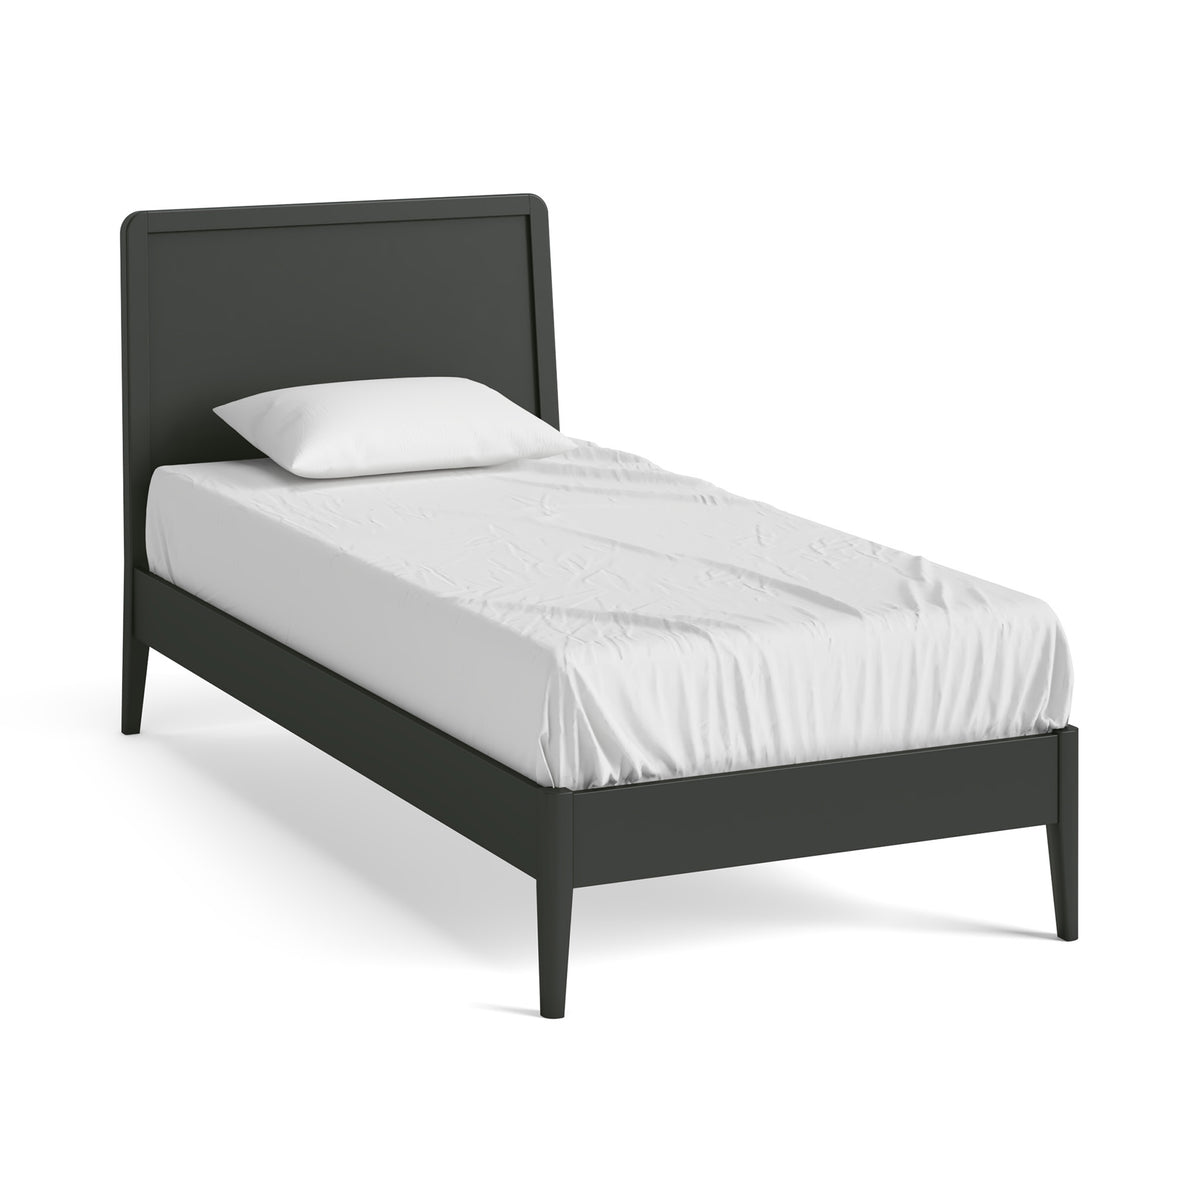 Dumbarton Charcoal Grey 3ft Single Bed Frame from Roseland Furniture